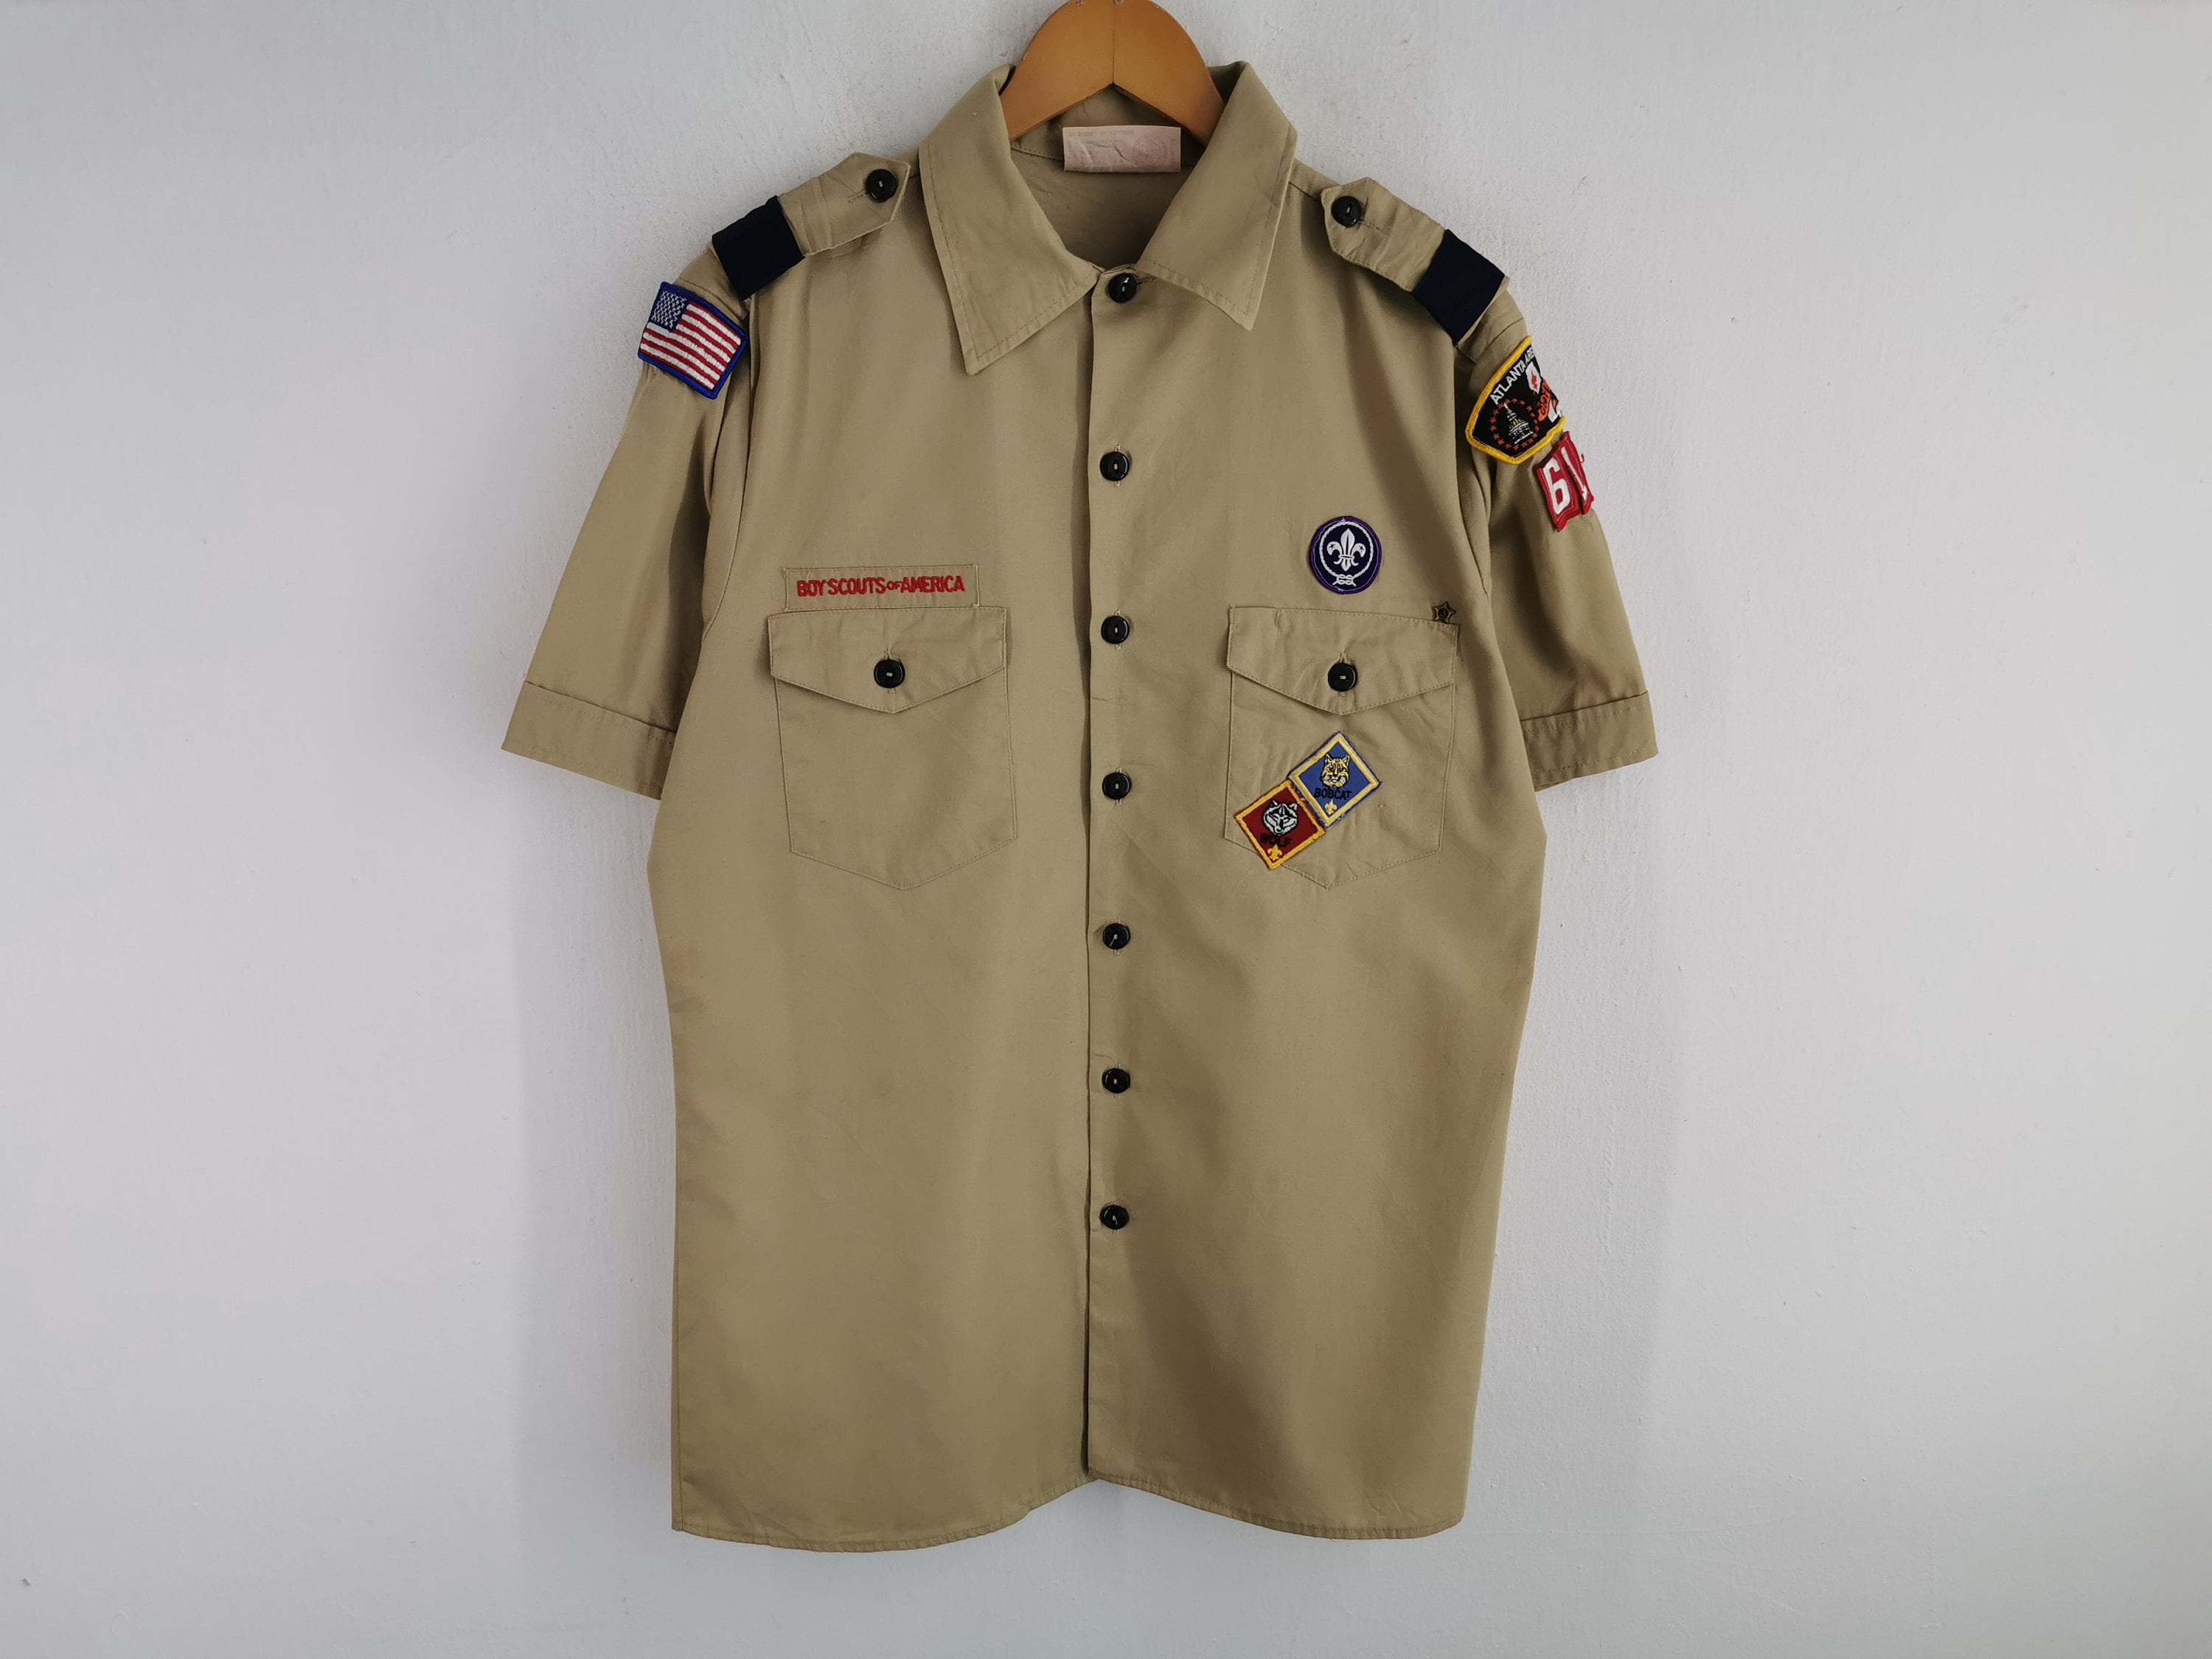 VTG Cub Scout & Boy Scout Uniform Shirts w/ Patches Badges and Pins  (see photos)